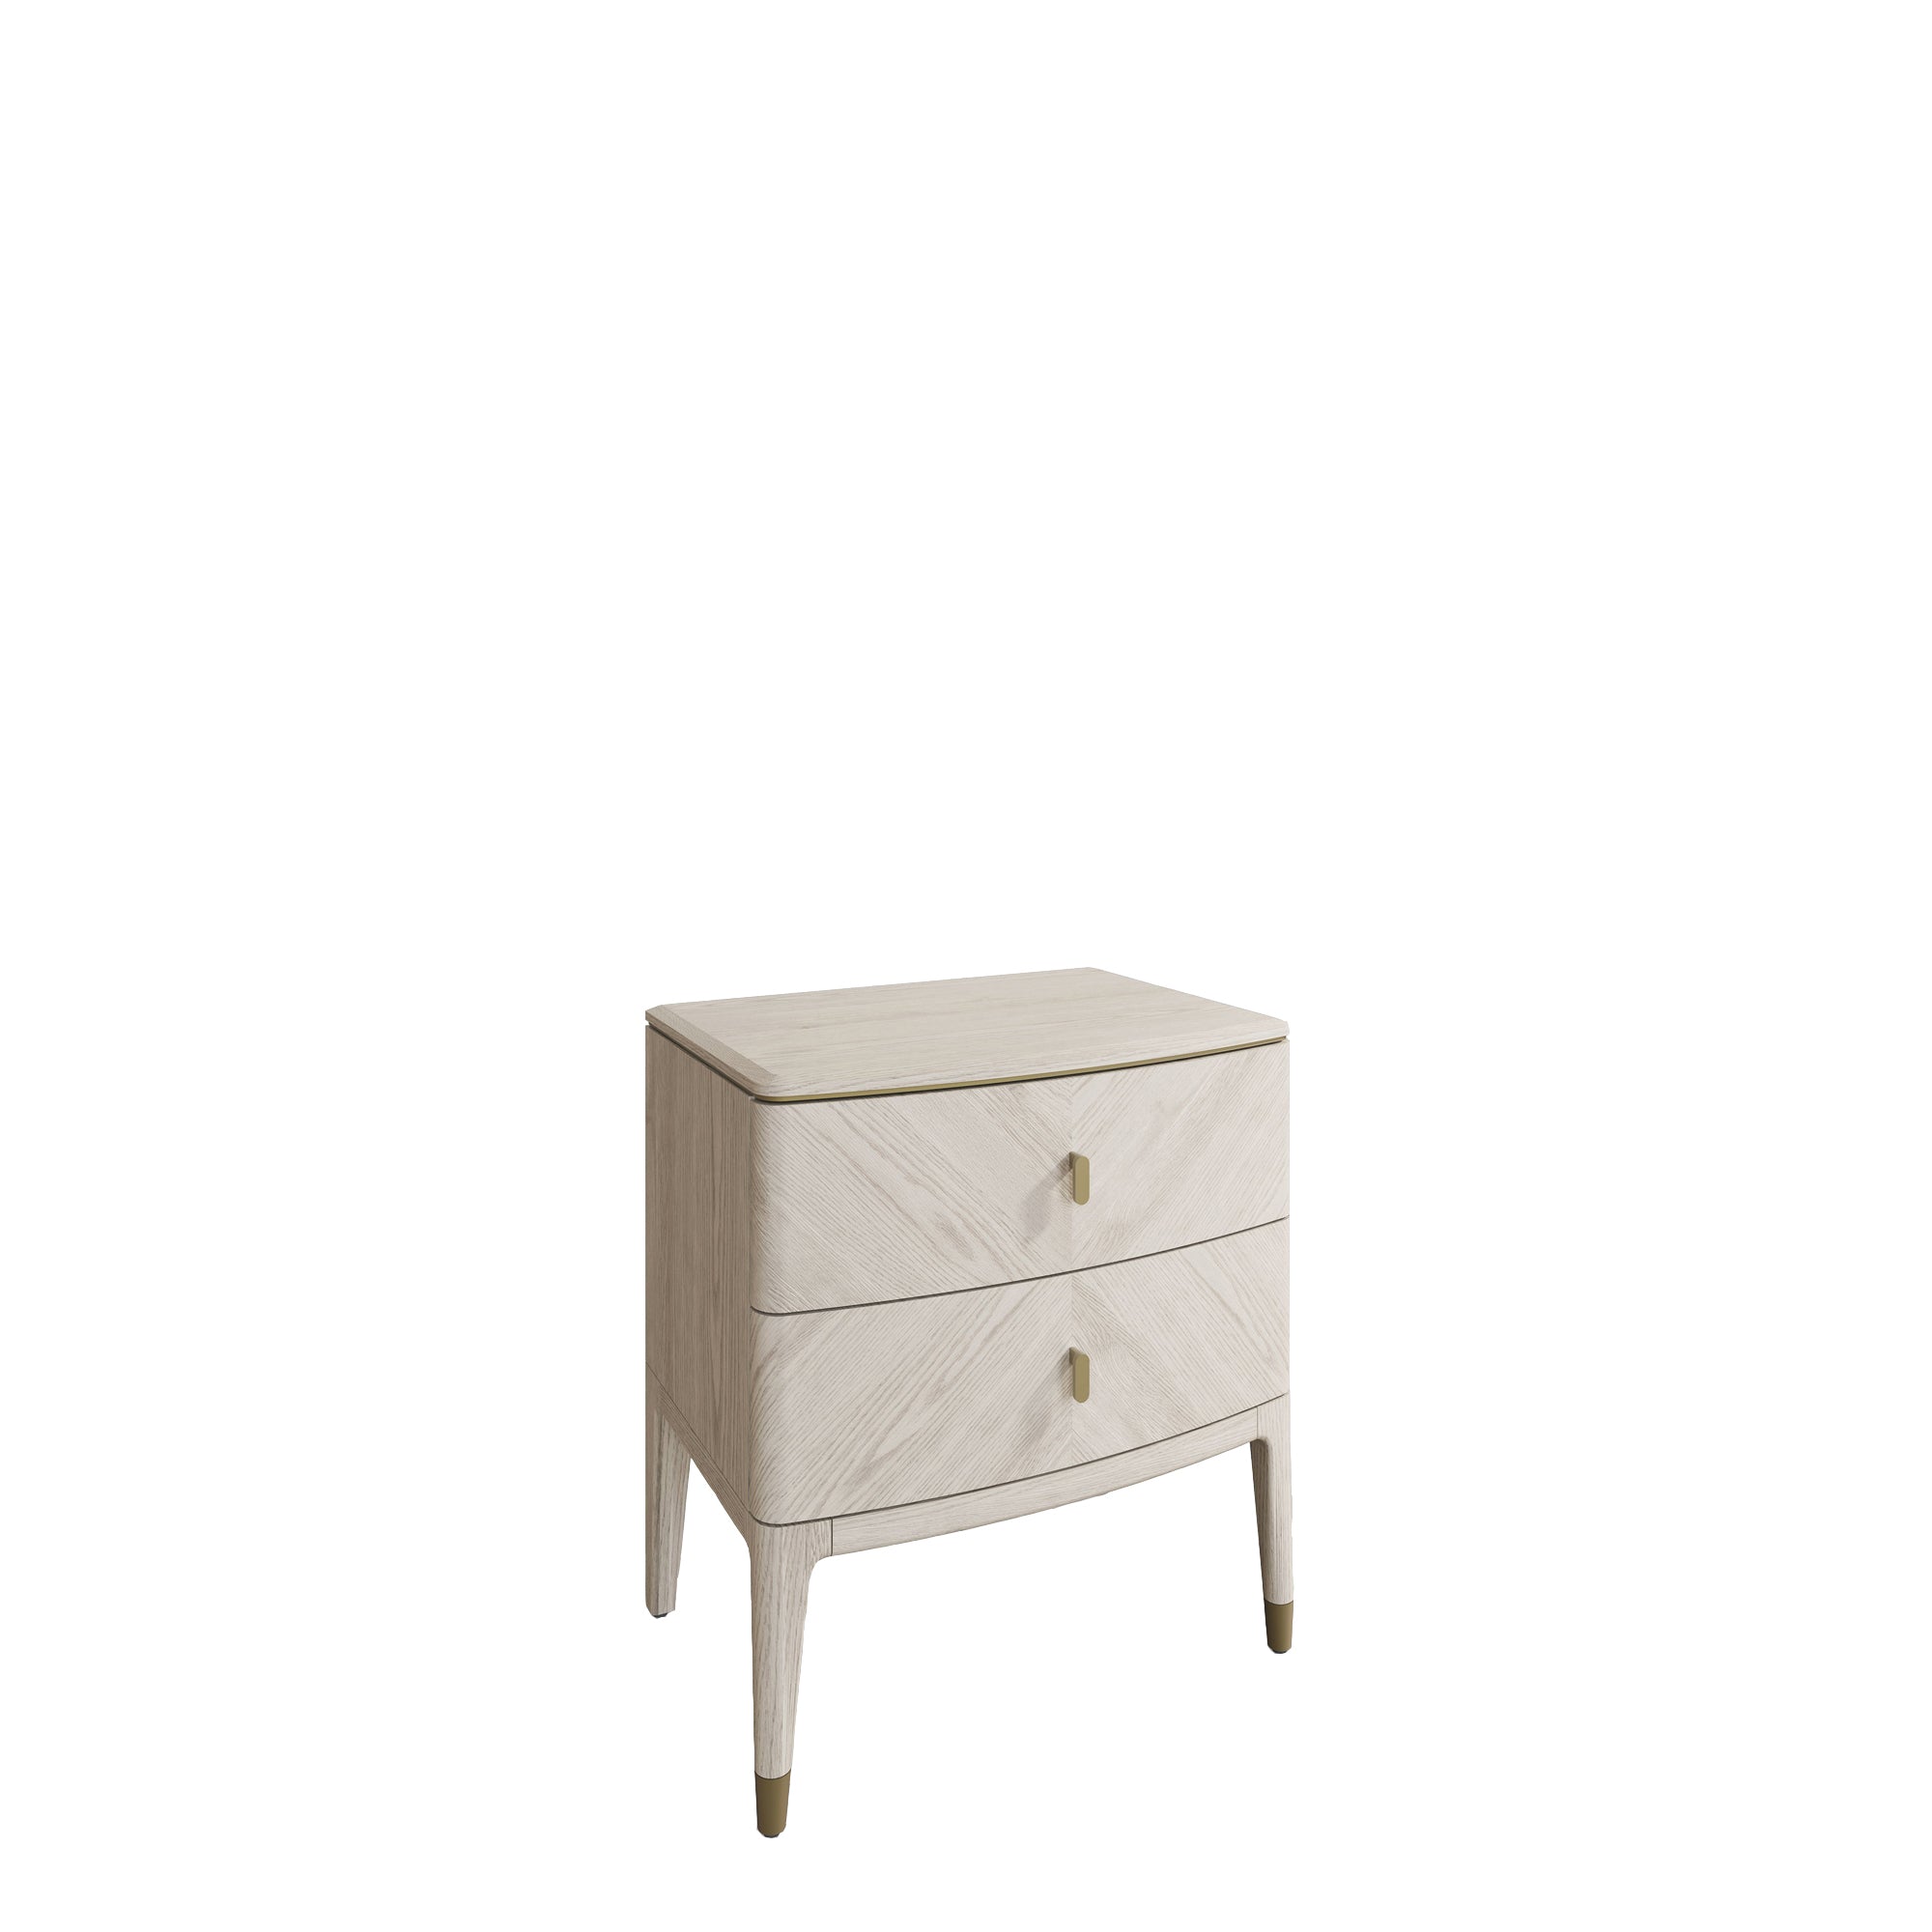 Dynasty - 2 Drawer Bedside Chest In Stone Finish